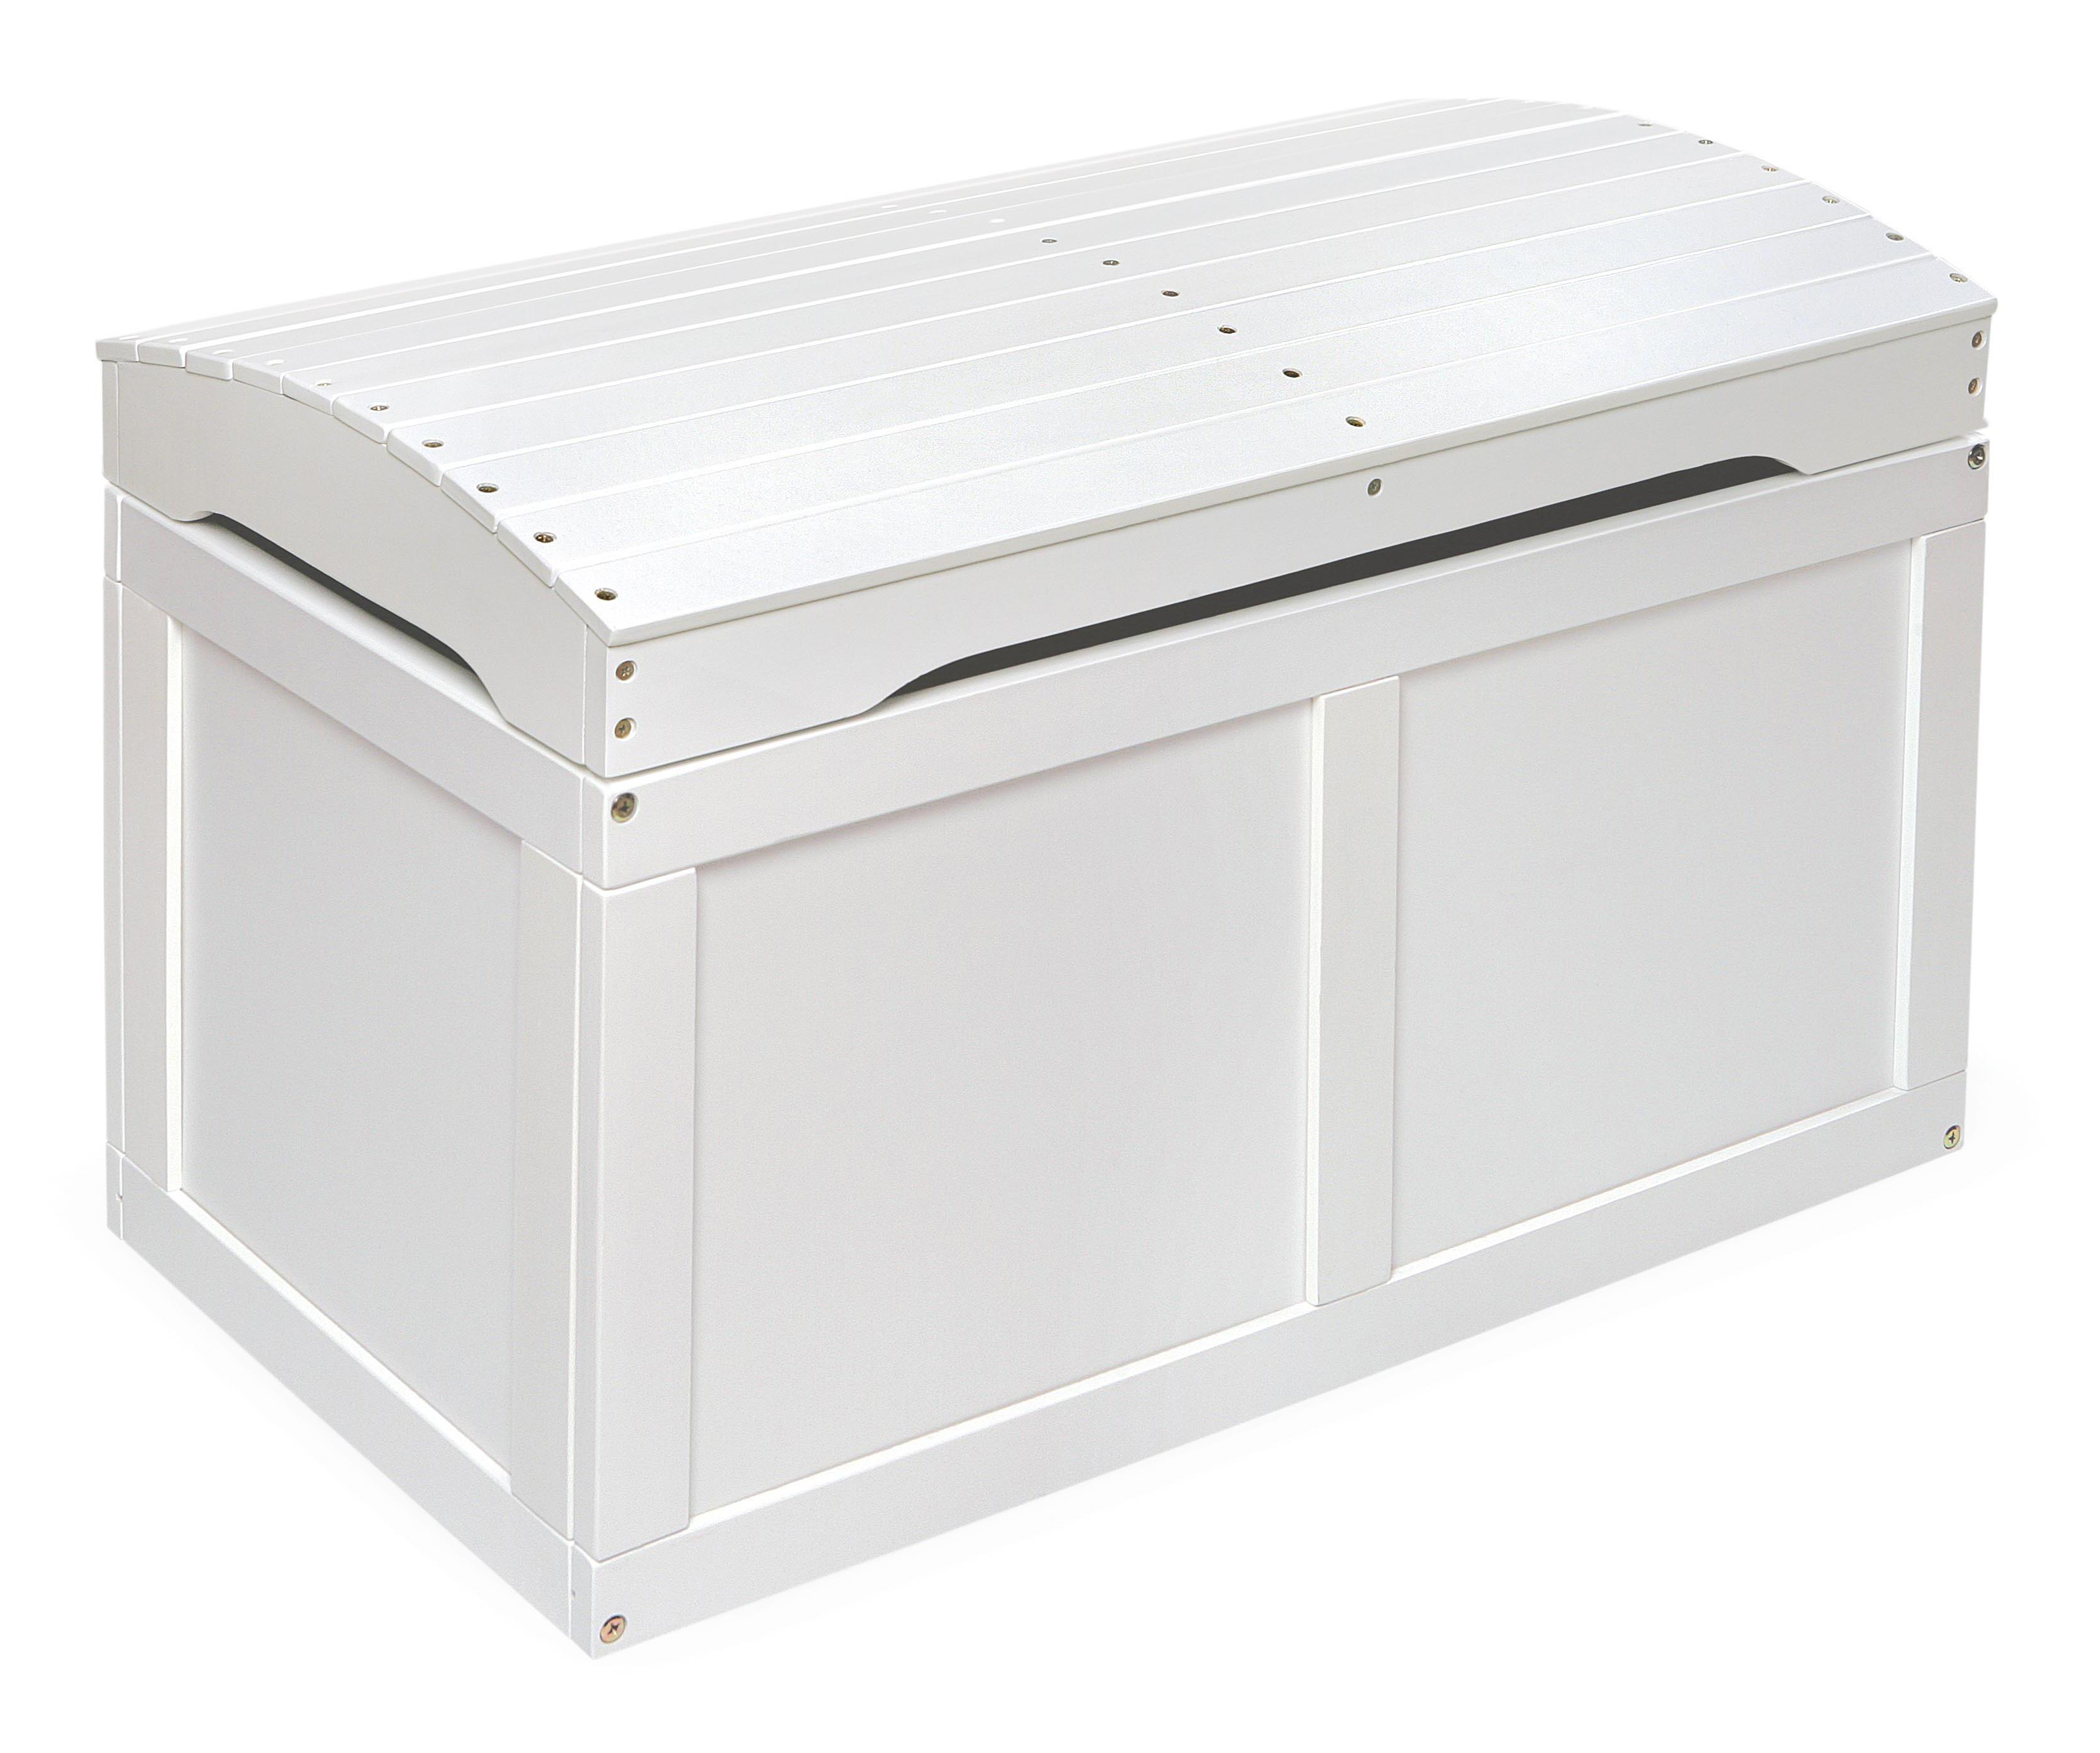 Hardwood Barrel Top Toy Chest - White